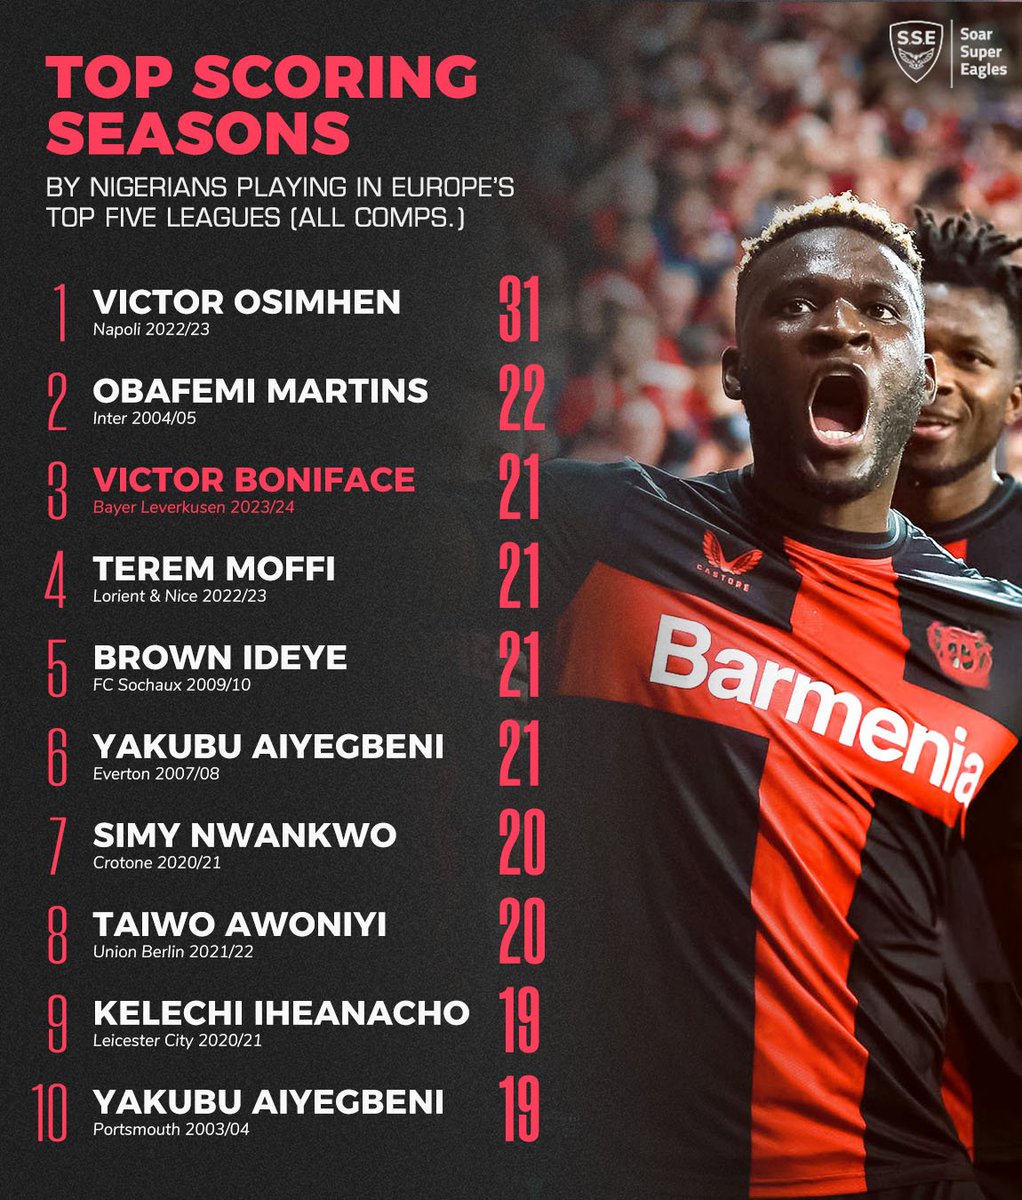 Victor Osimhen tops the chart of most scoring Nigeria in Europe in a single season. 

We have so many TALENTED strikers 🔥🇳🇬